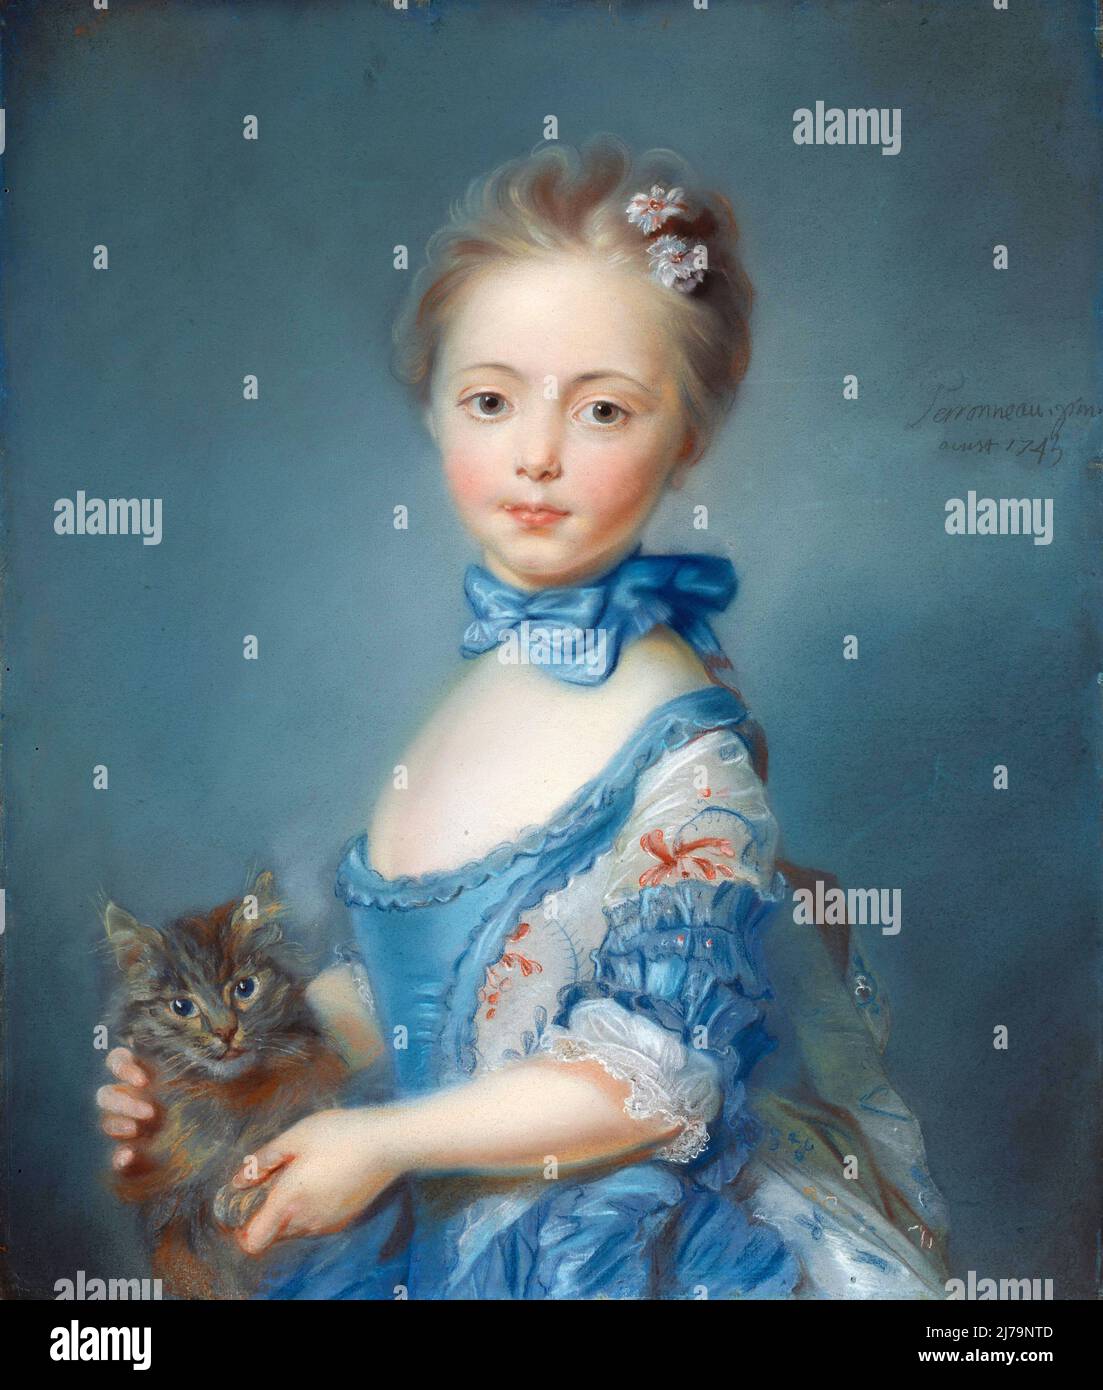 A Girl with a Kitten by the French artist, Jean-Baptiste Perronneau (c. 1716-1783), pastel on blue paper laid down on canvas, 1743 Stock Photo